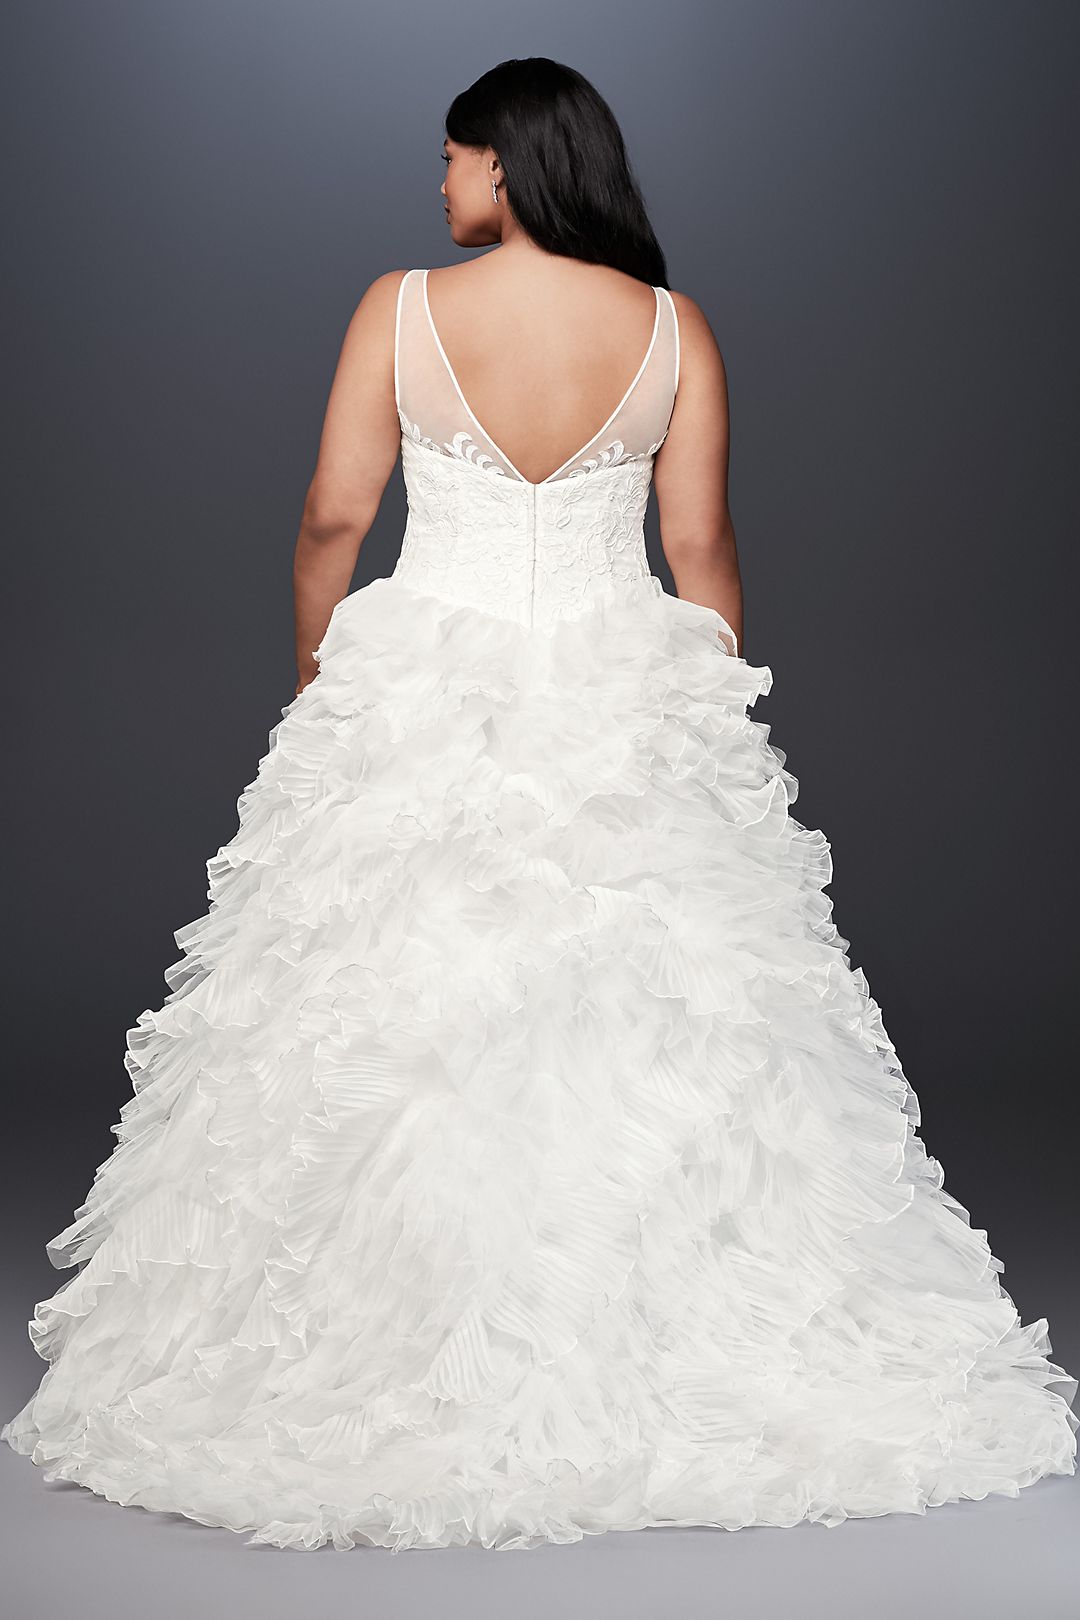 As-Is Plunging Plus Size Wedding Dress Image 2